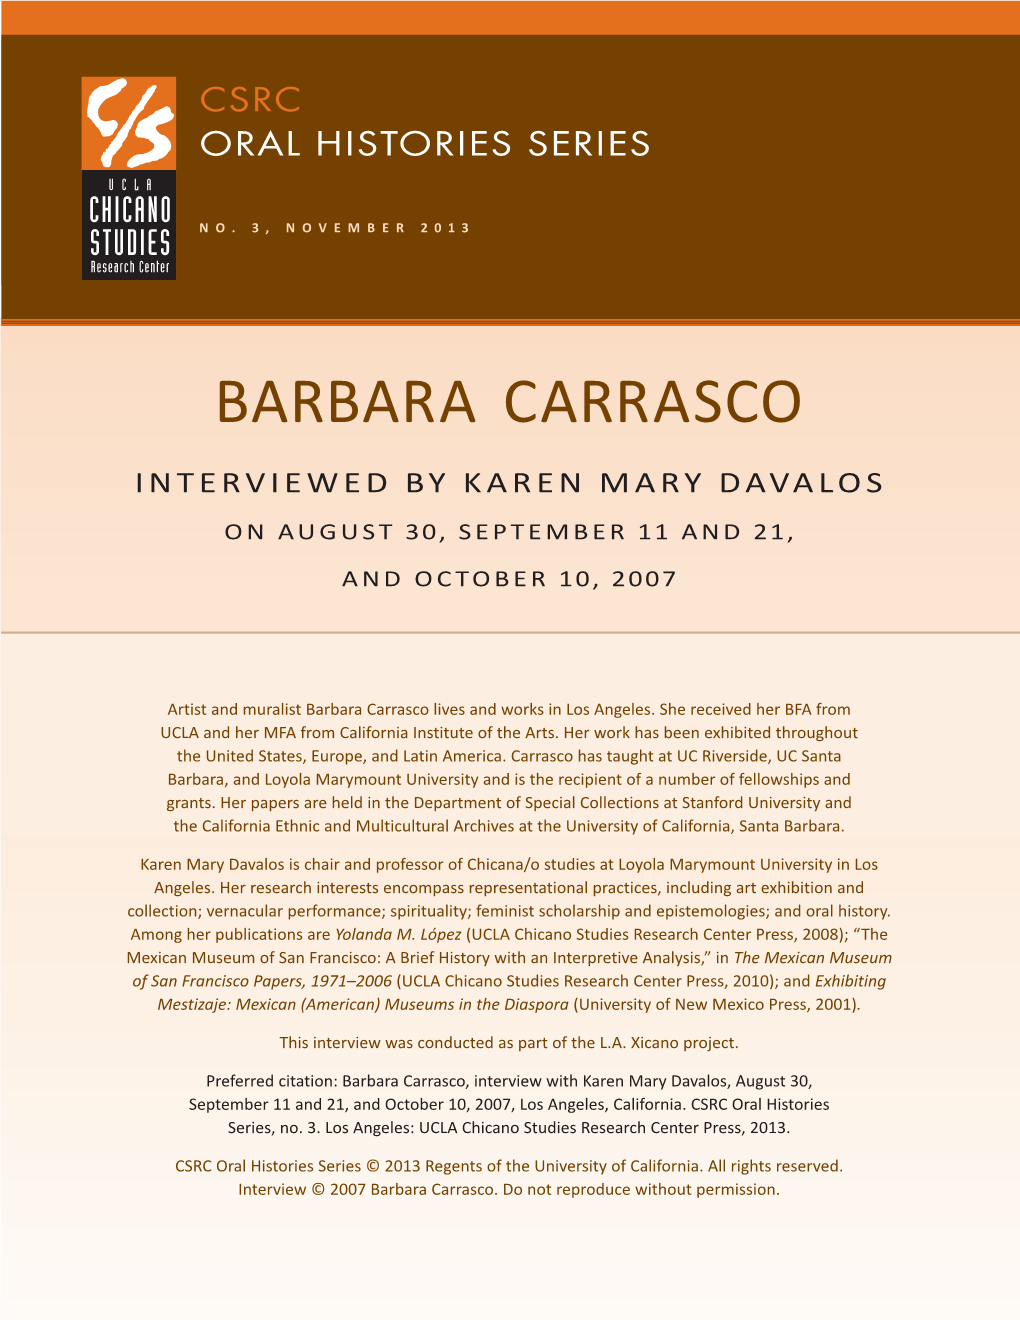 Barbara Carrasco Interviewed by Karen Mary Davalos on August 30, September 11 and 21, and October 10, 2007